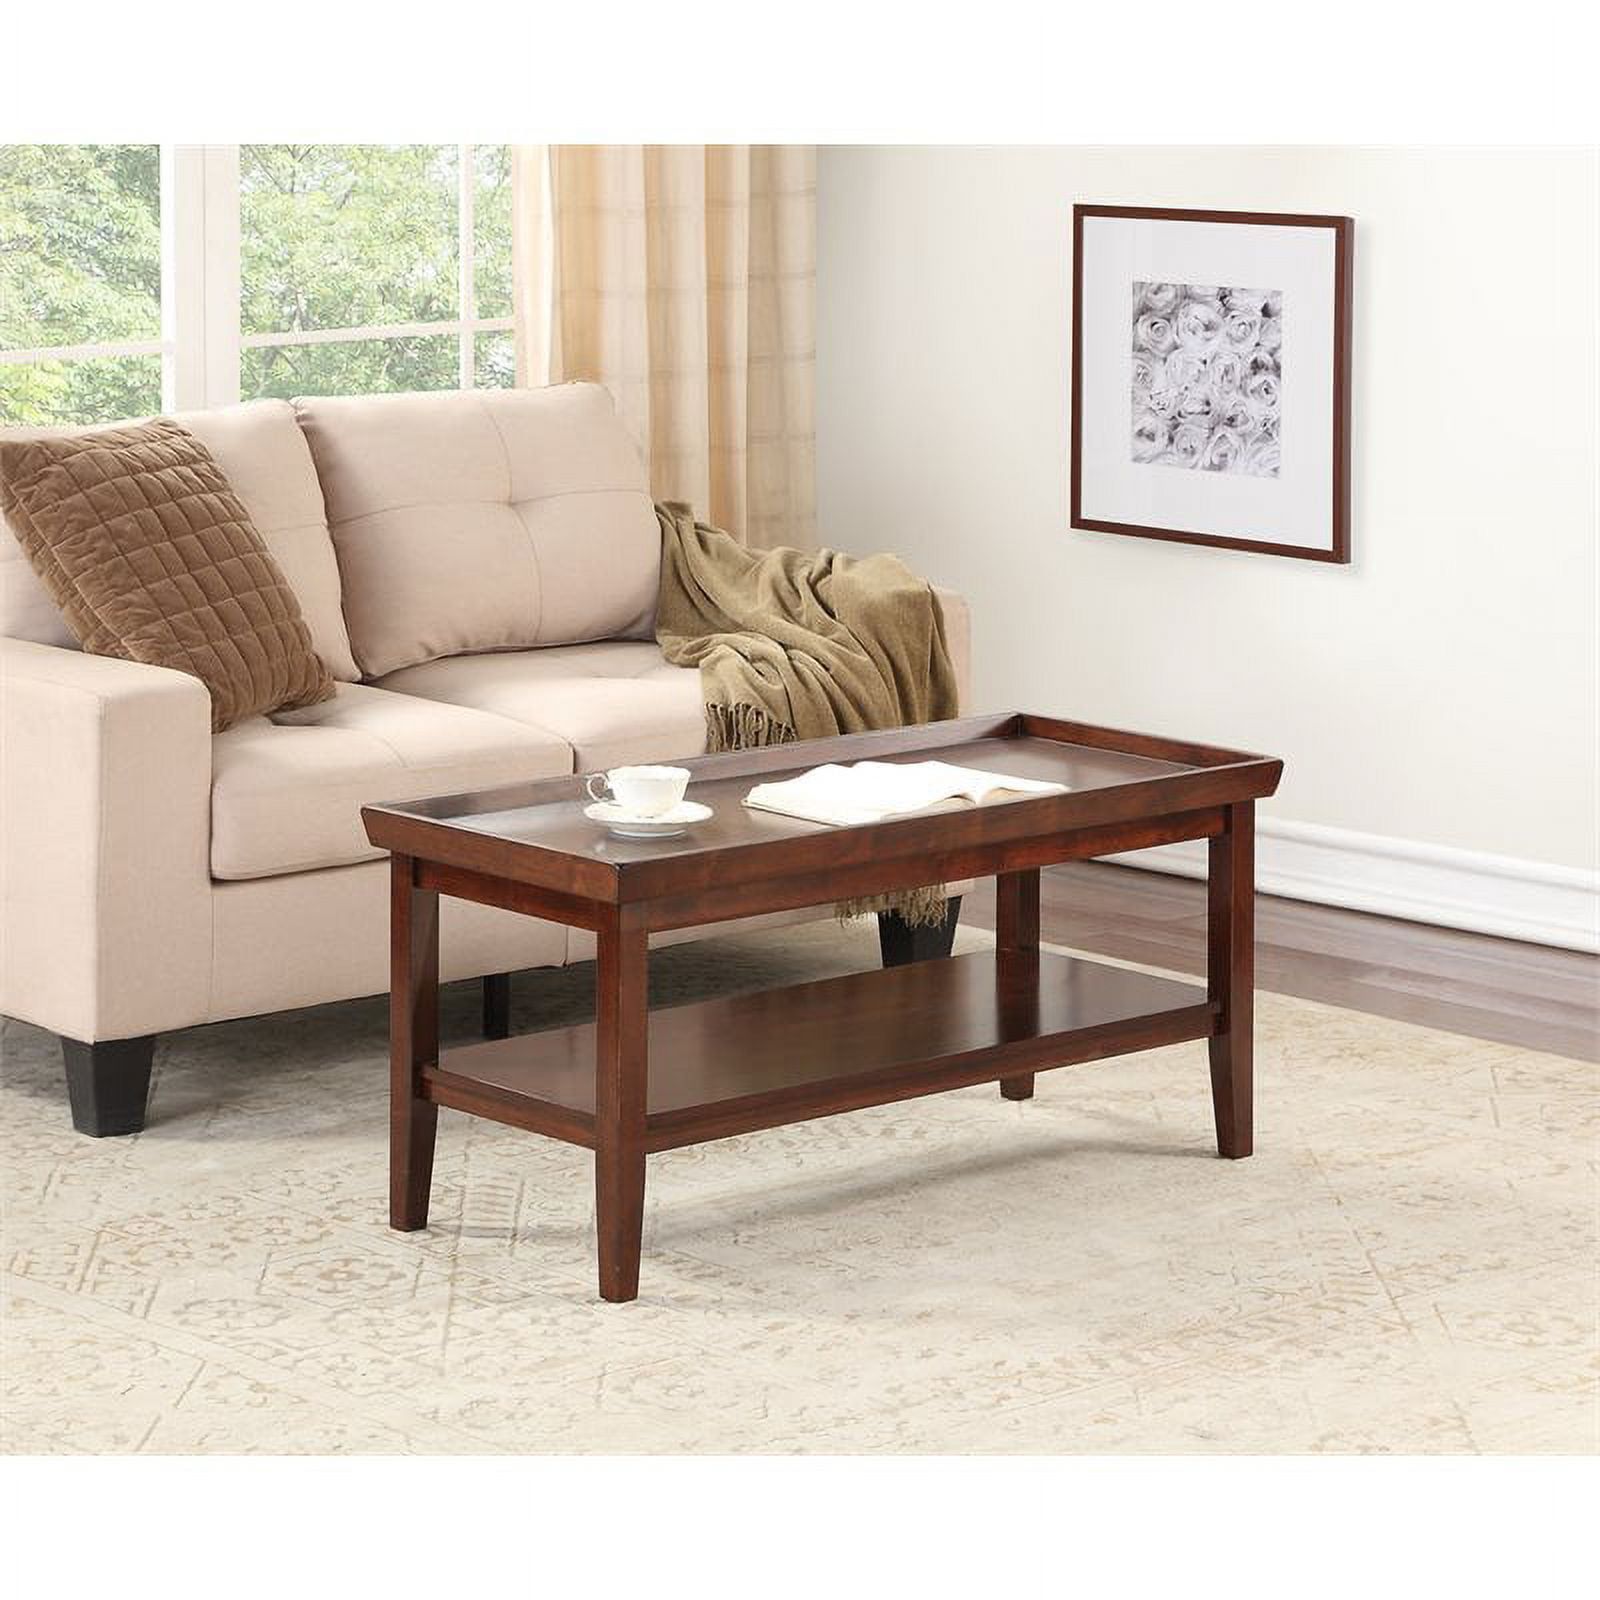 Pemberly Row Coffee Table In Espresso Wood Finish – Walmart For Espresso Wood Finish Coffee Tables (View 11 of 15)